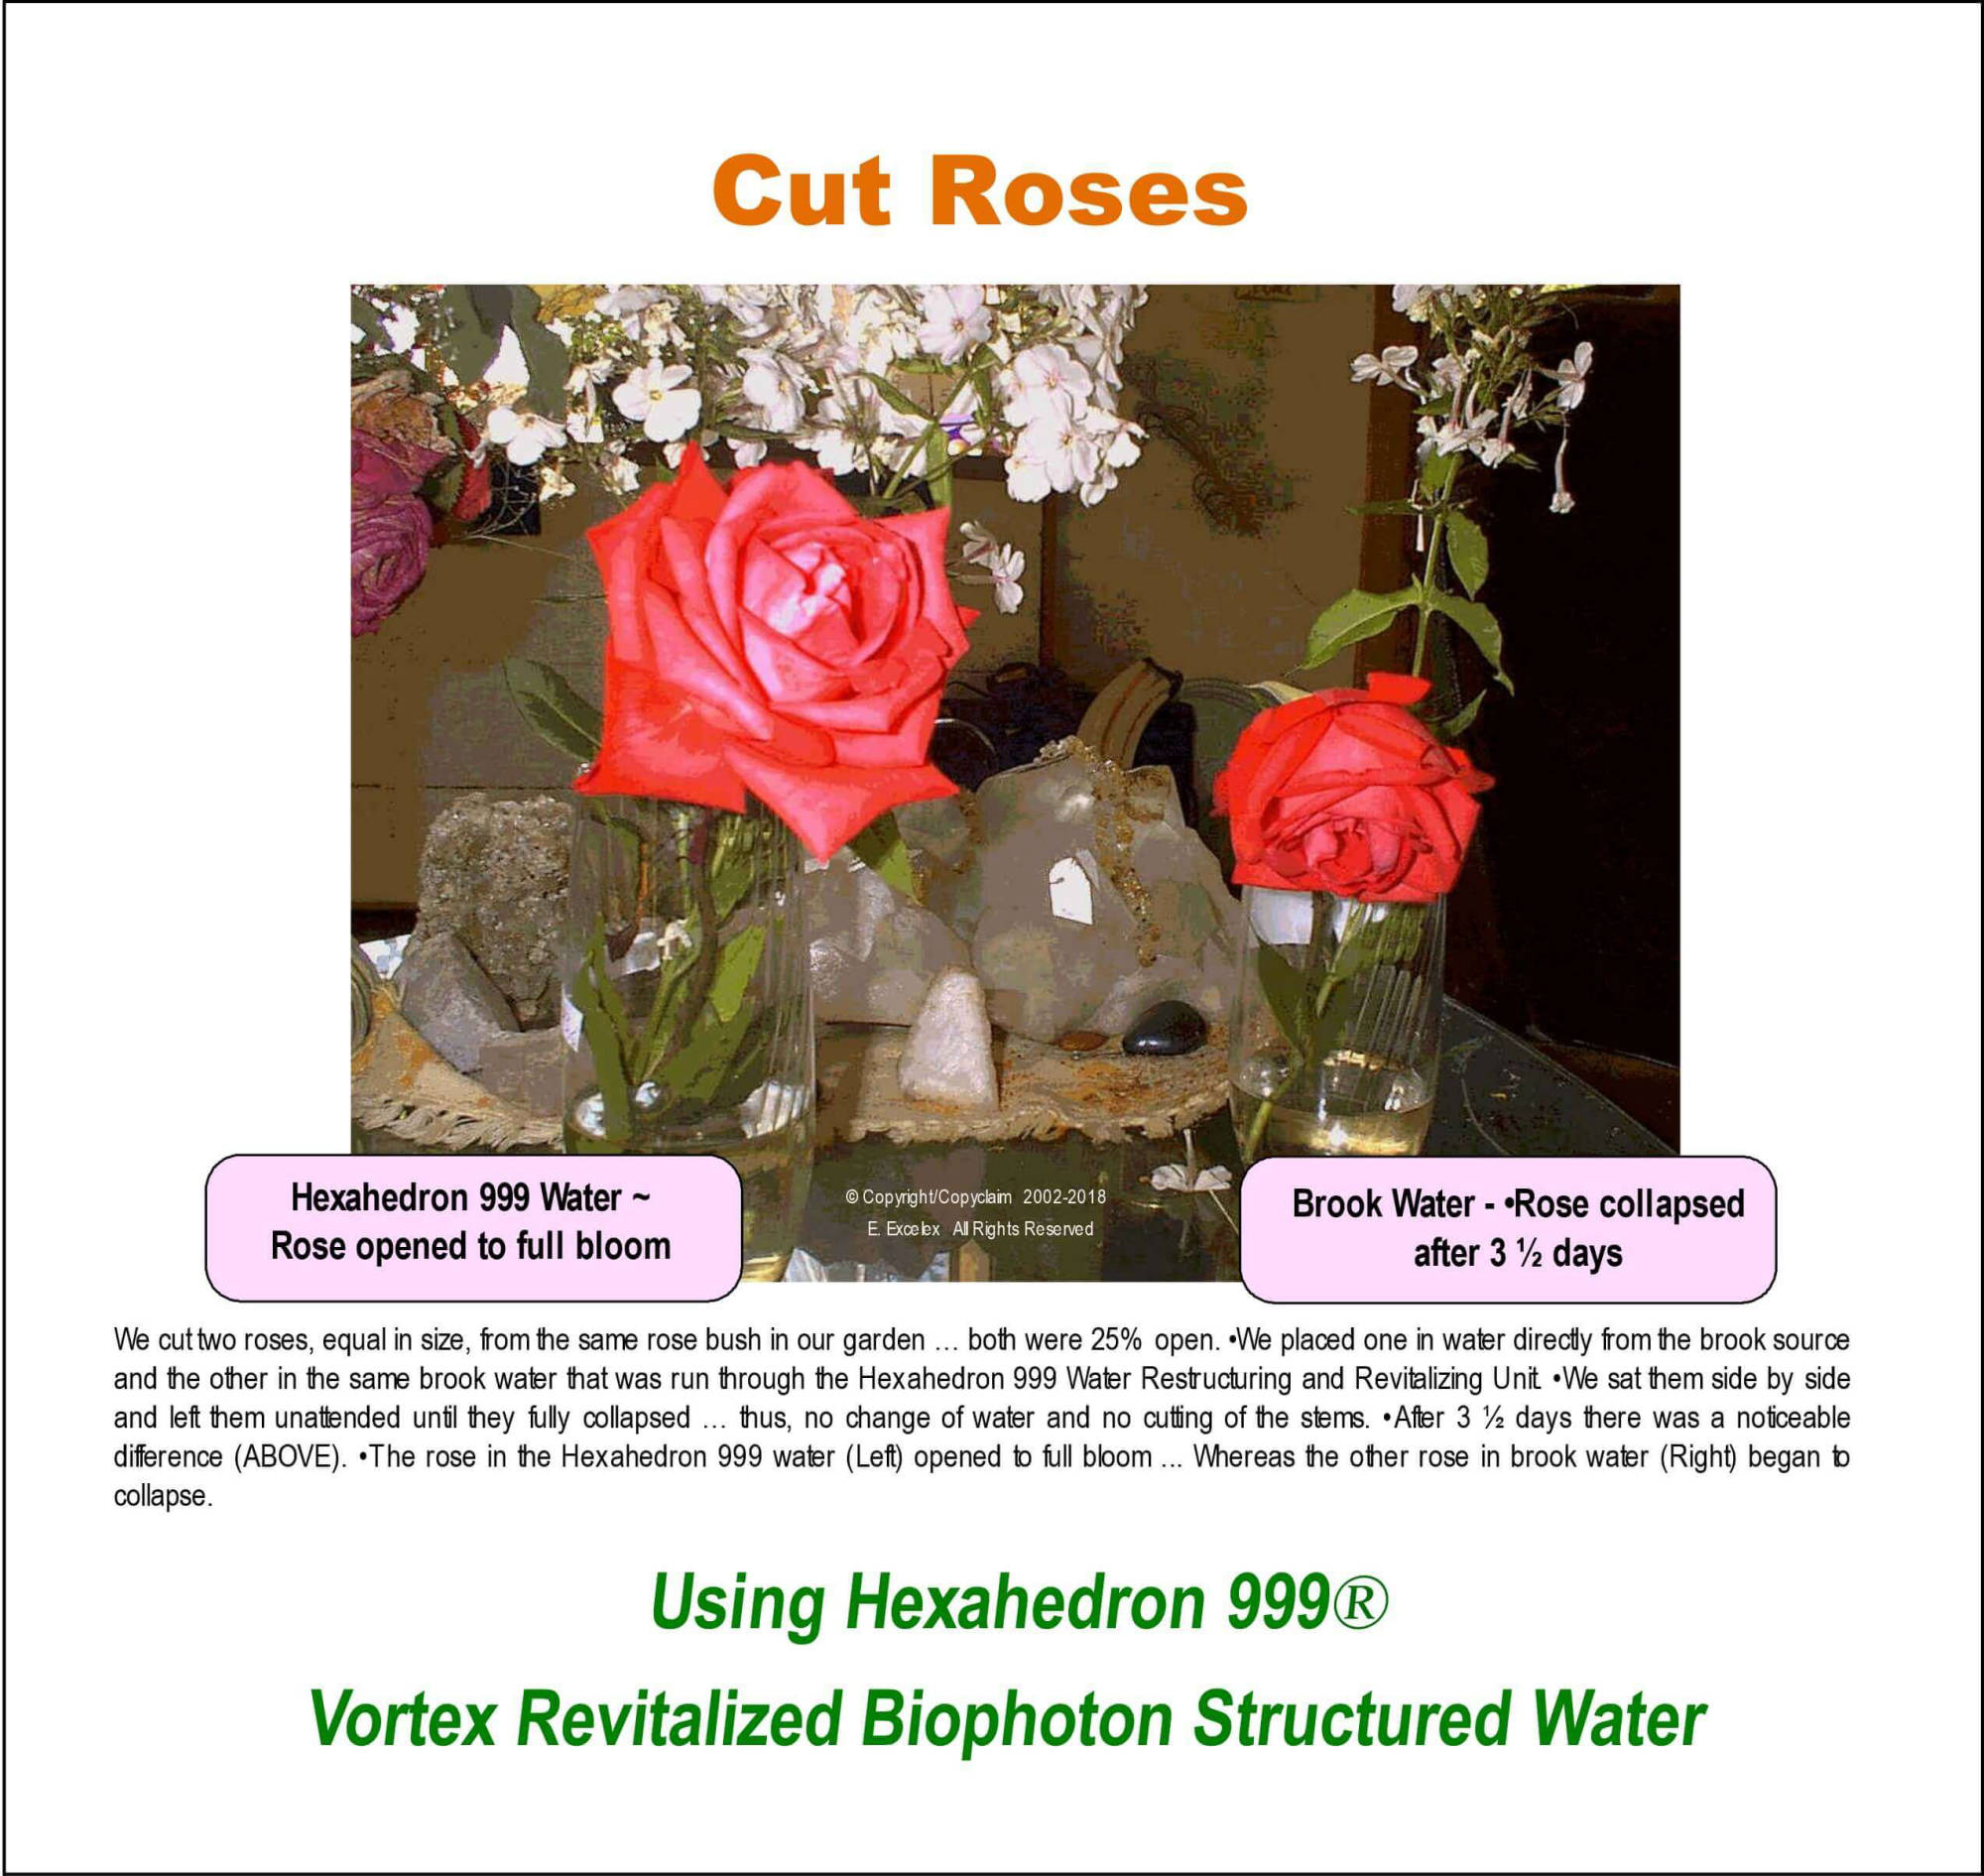 Cut Roses using Hexahedron 999 Vortex Revitalized Structured Biophoton Water